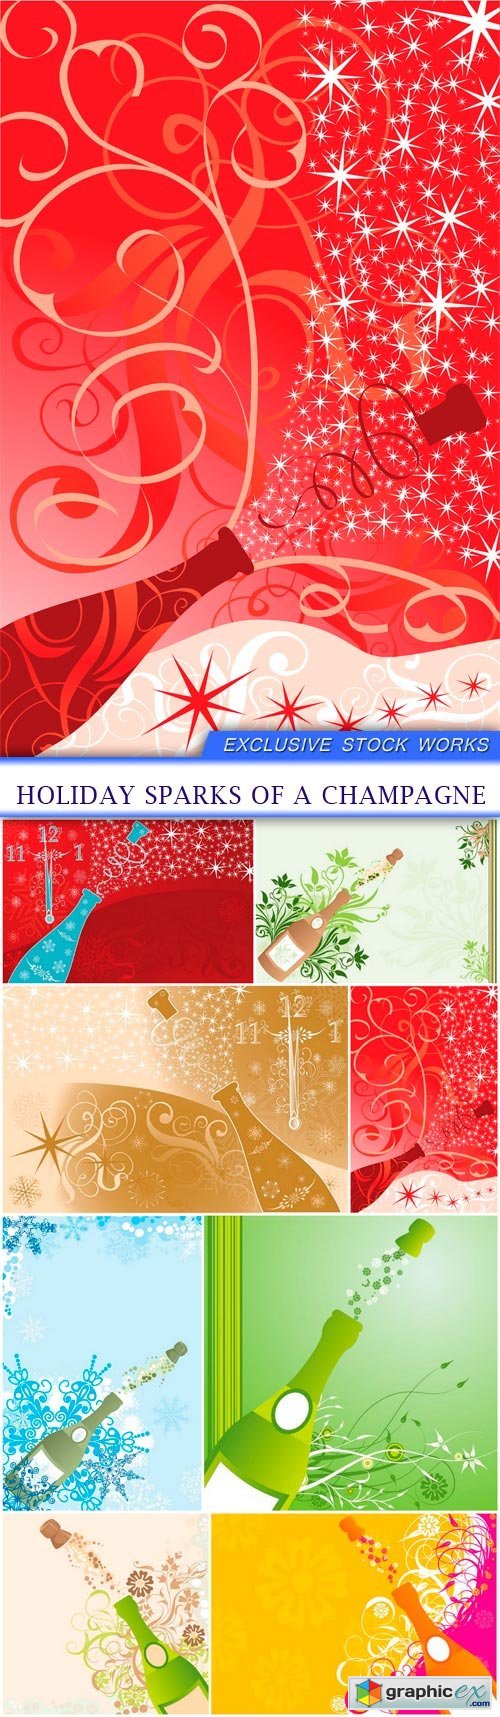 Holiday sparks of a champagne 8x EPS